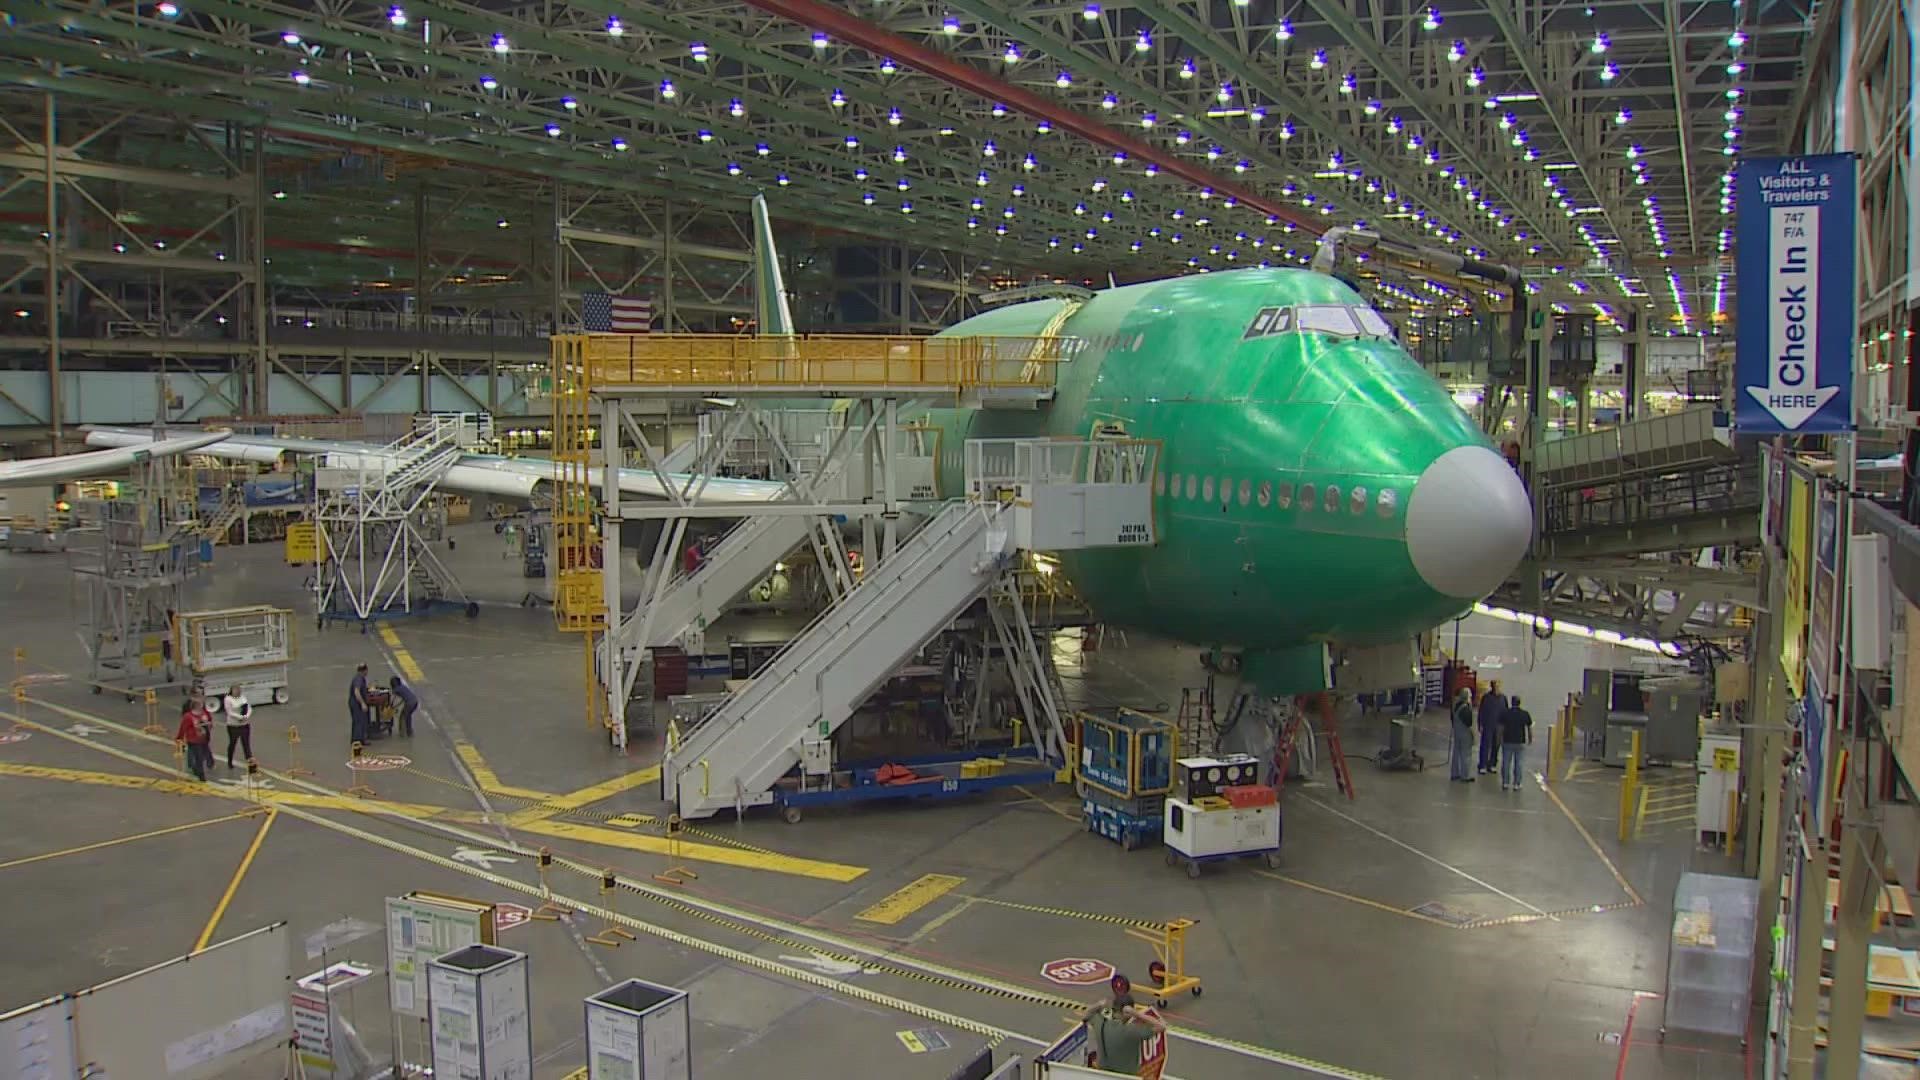 Boeing took more than 200 net orders for passenger airplanes in December to complete its best year since 2018.